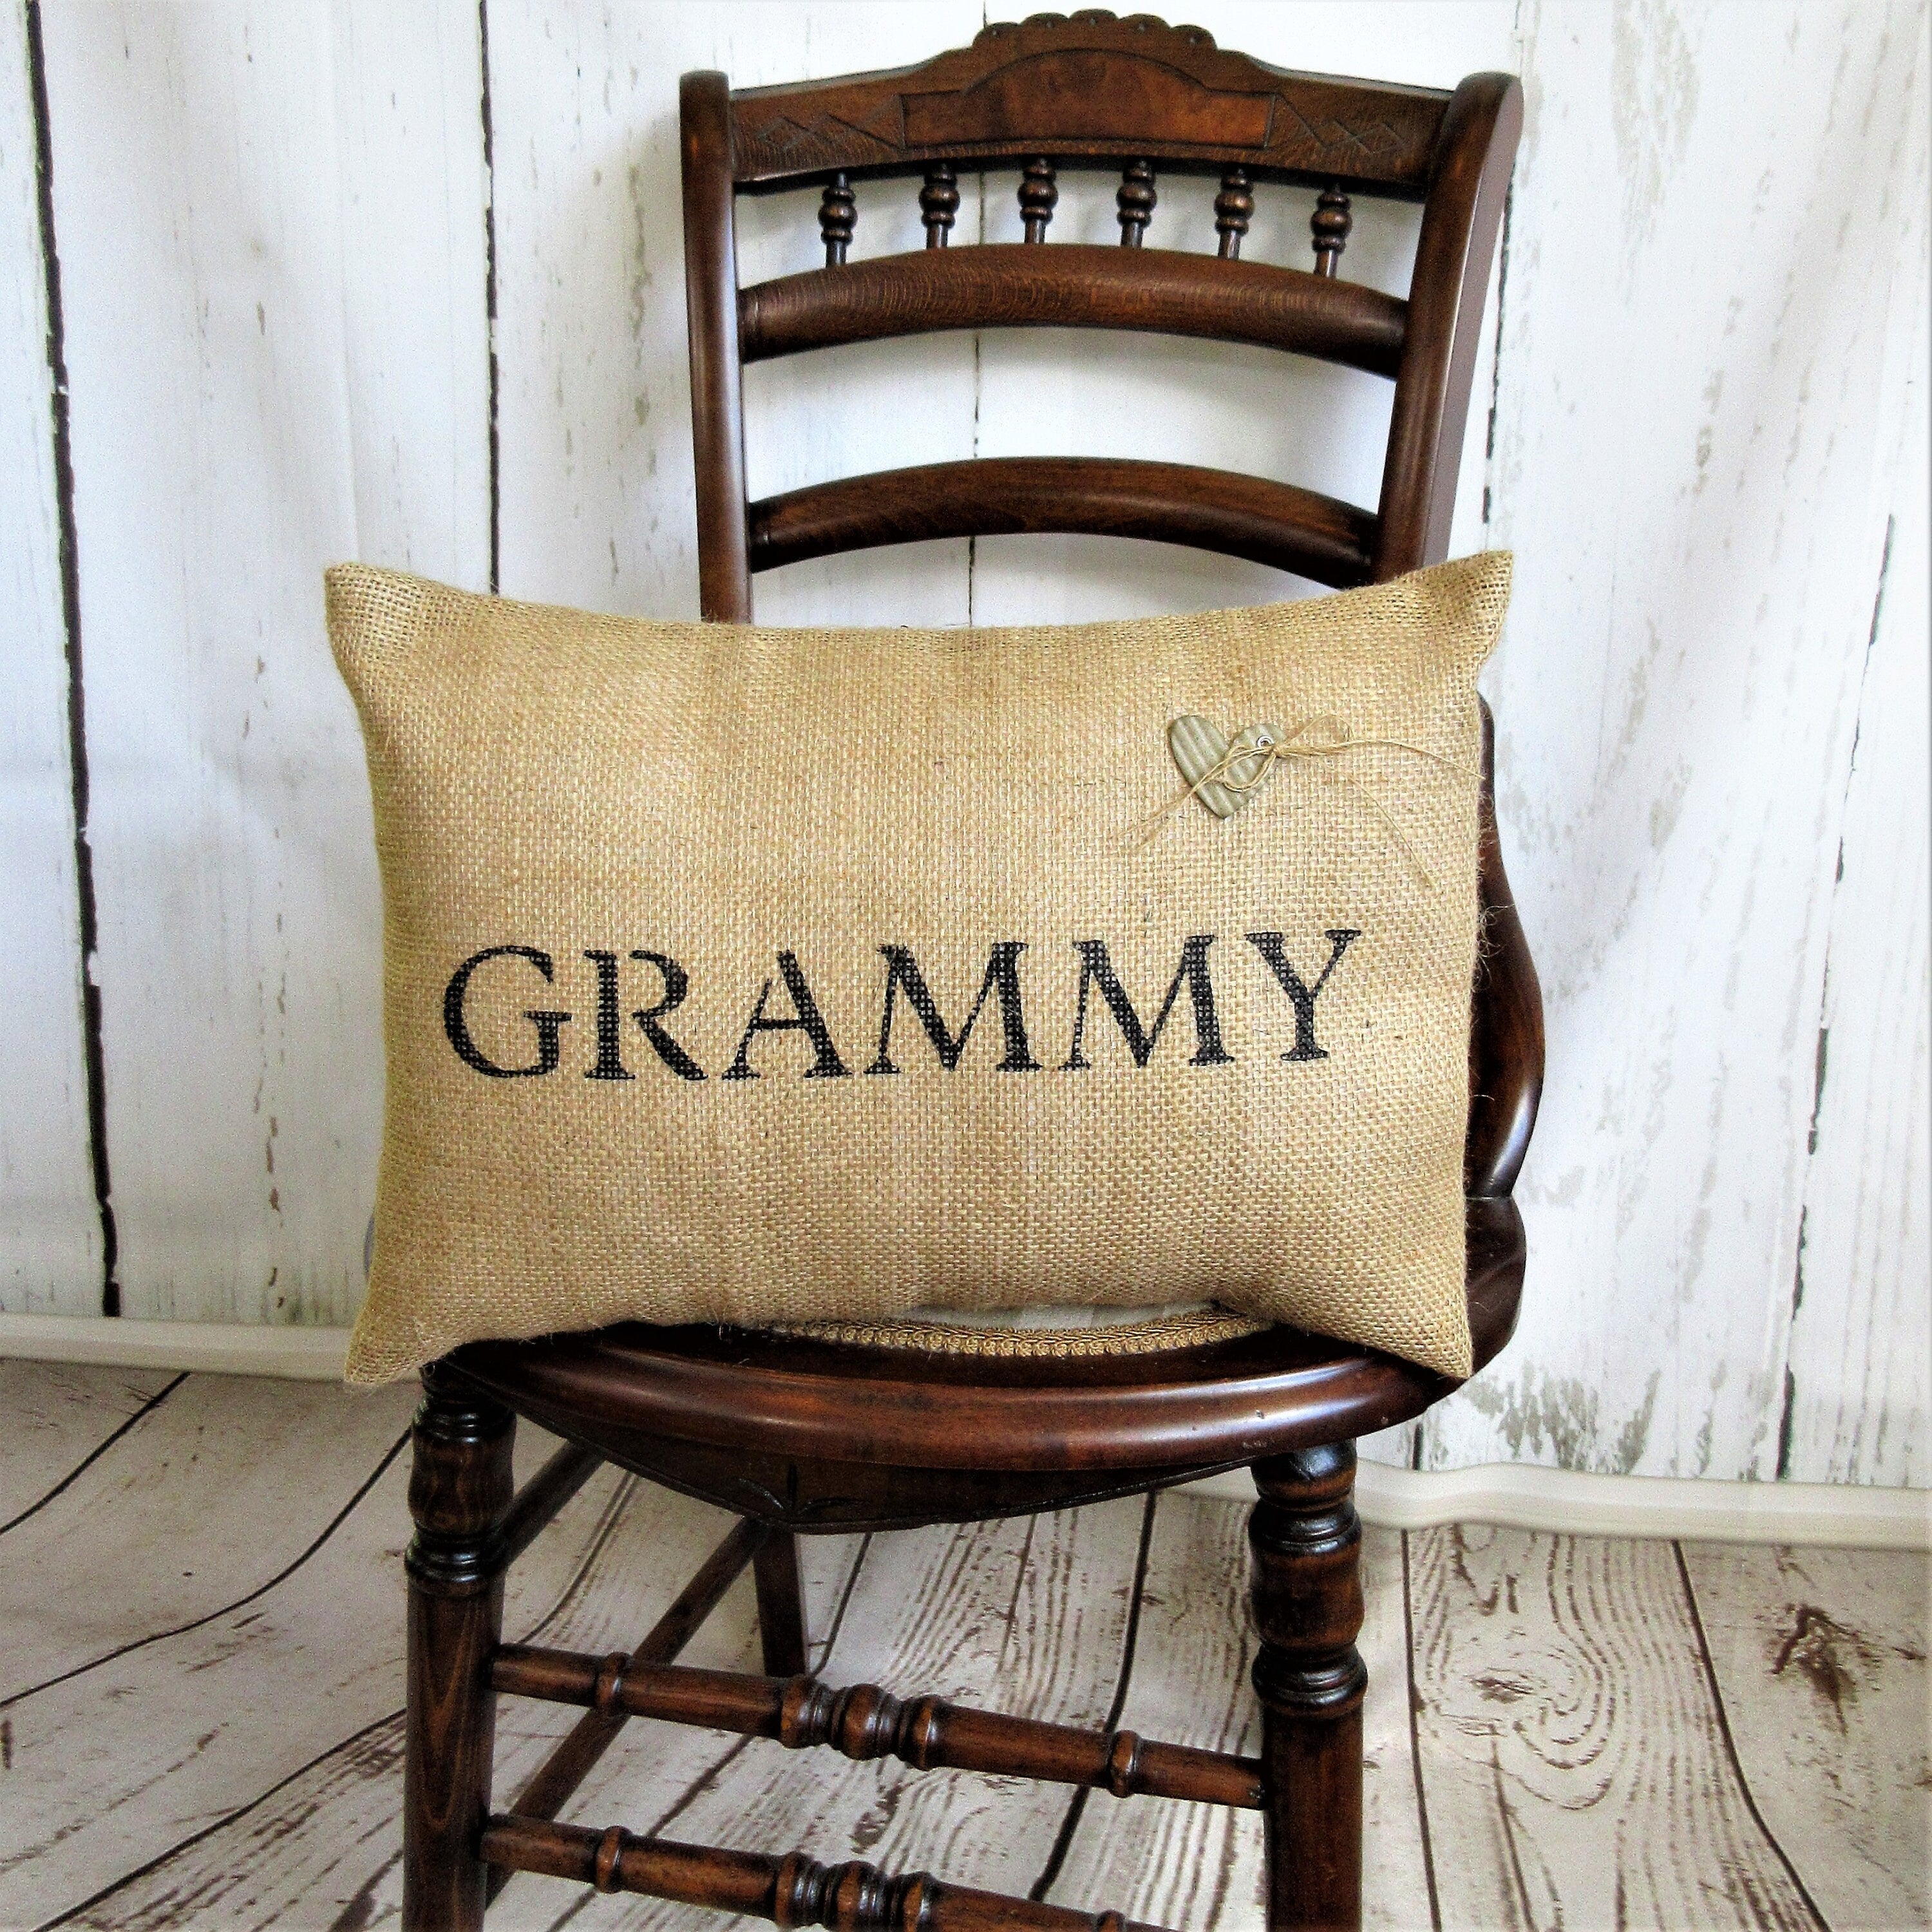 Grammy pillow, Gift for Grammy, Grammy present, Mother's day gift, burlap pillow, personalized pillow, FREE SHIPPING!